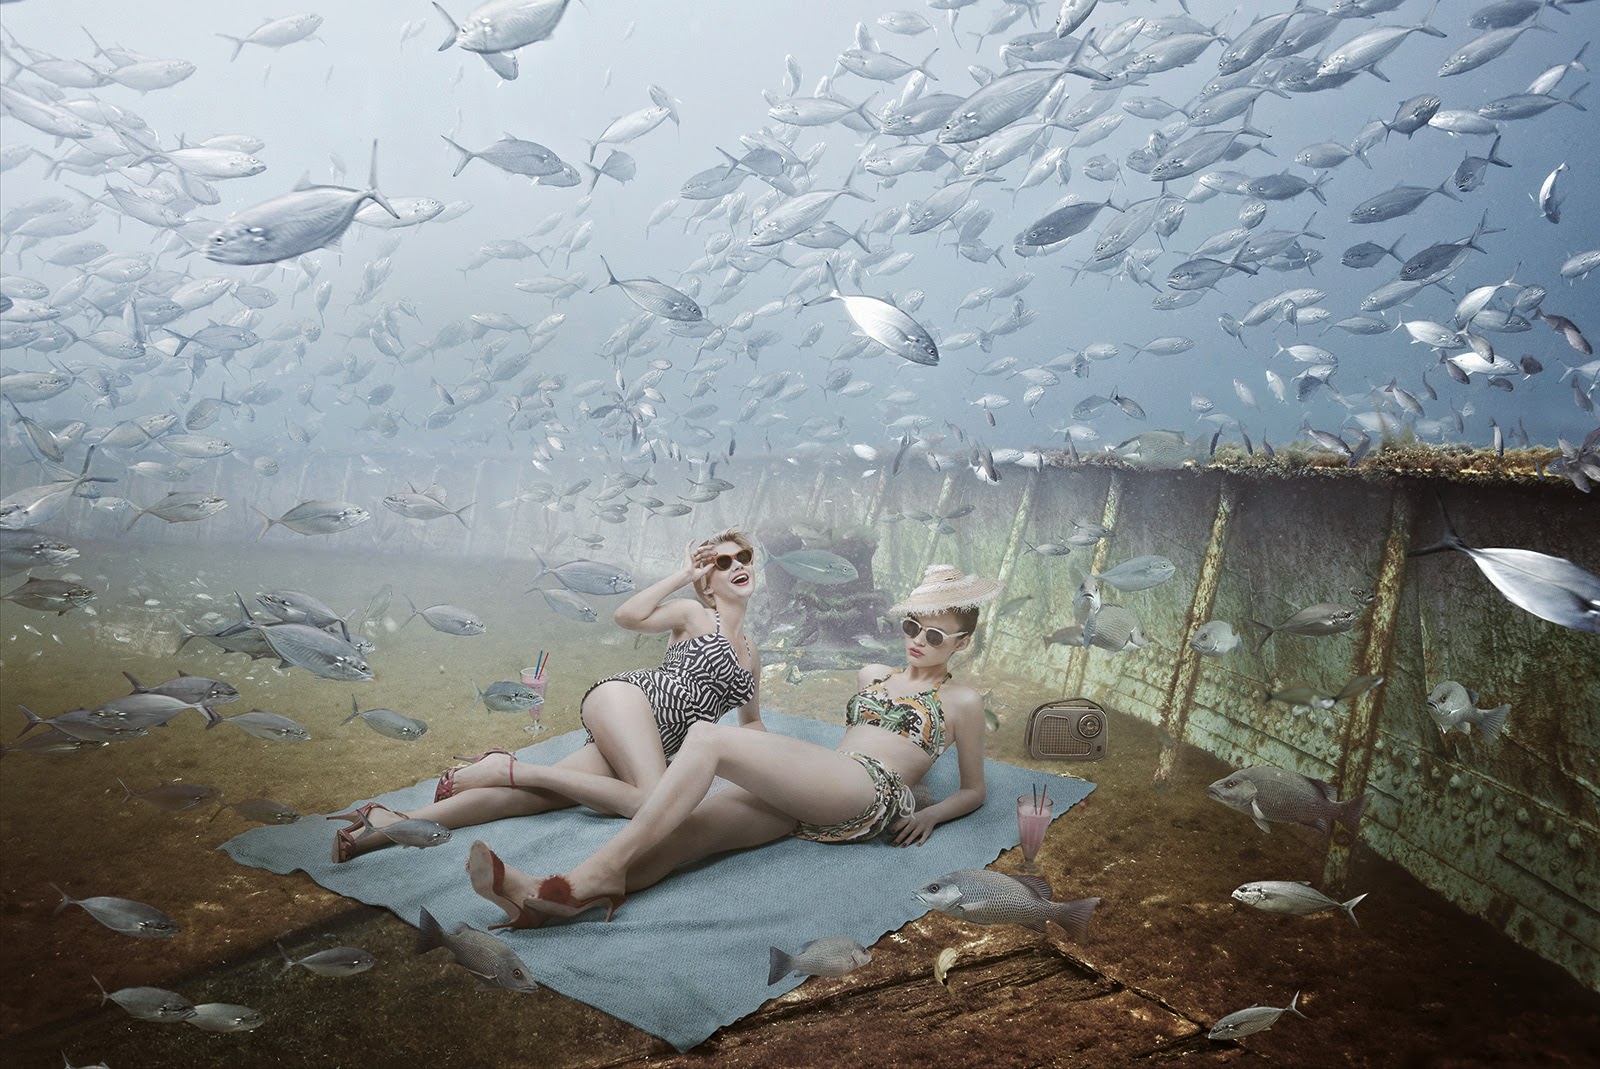 23-Andreas-Franke-Surreal-Artificial-Reef-Photography-www-designstack-co